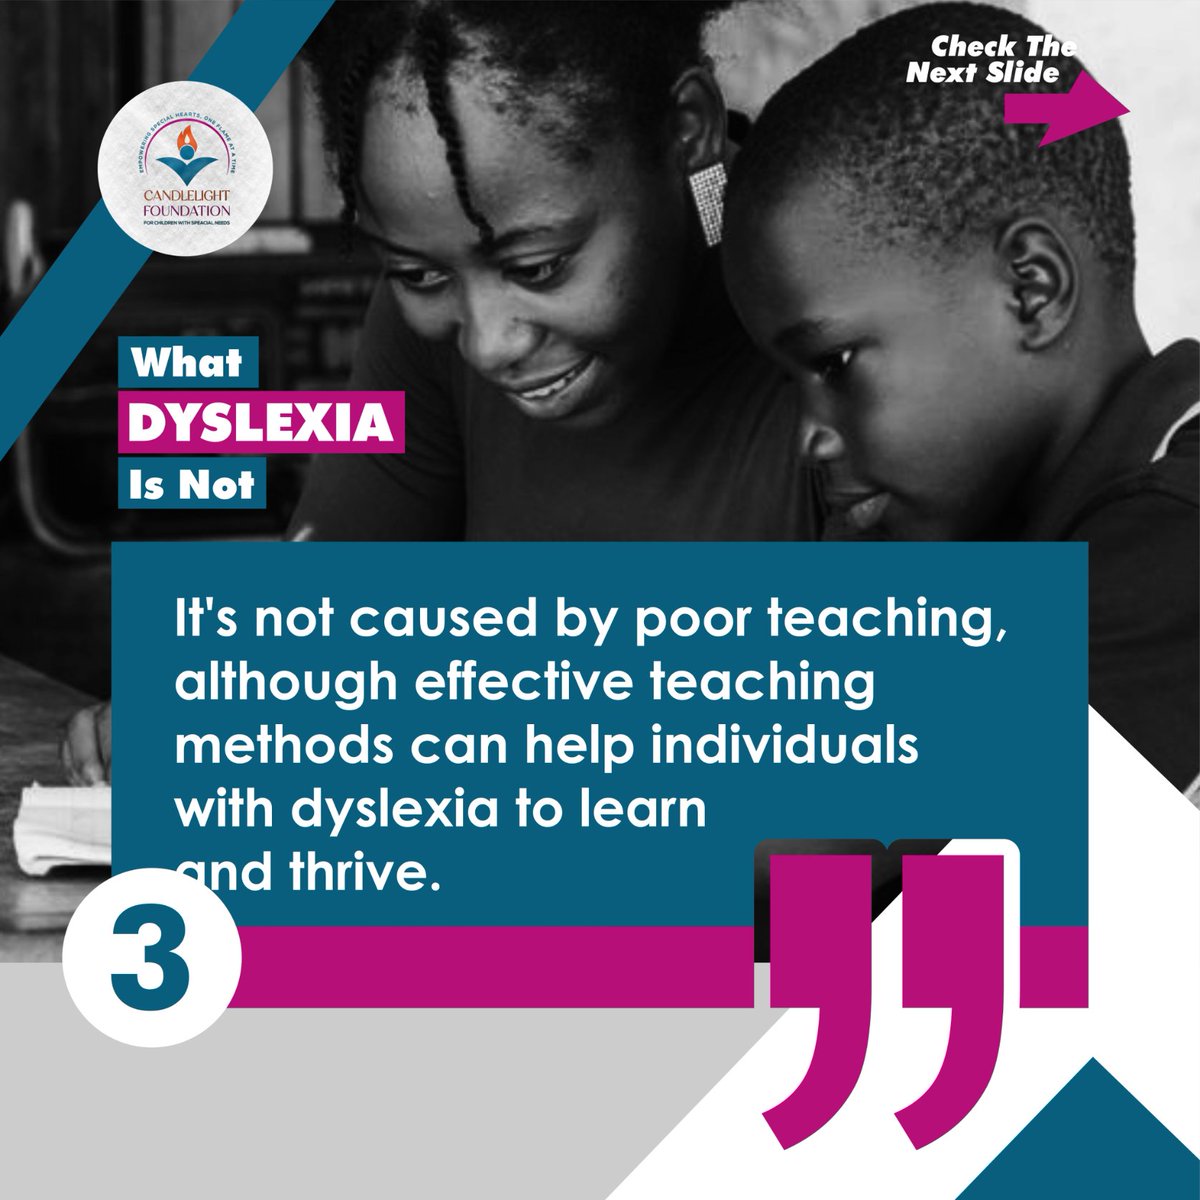 Often times we assume what Dyslexia is whereas it is not . Here we debunk certain stereotypes of what Dyslexia is.

#CandleLightFoundation #SpecialNeedSupport #YouAreNotAlone #Dyslexia #ADHD #Austism #WeTSR